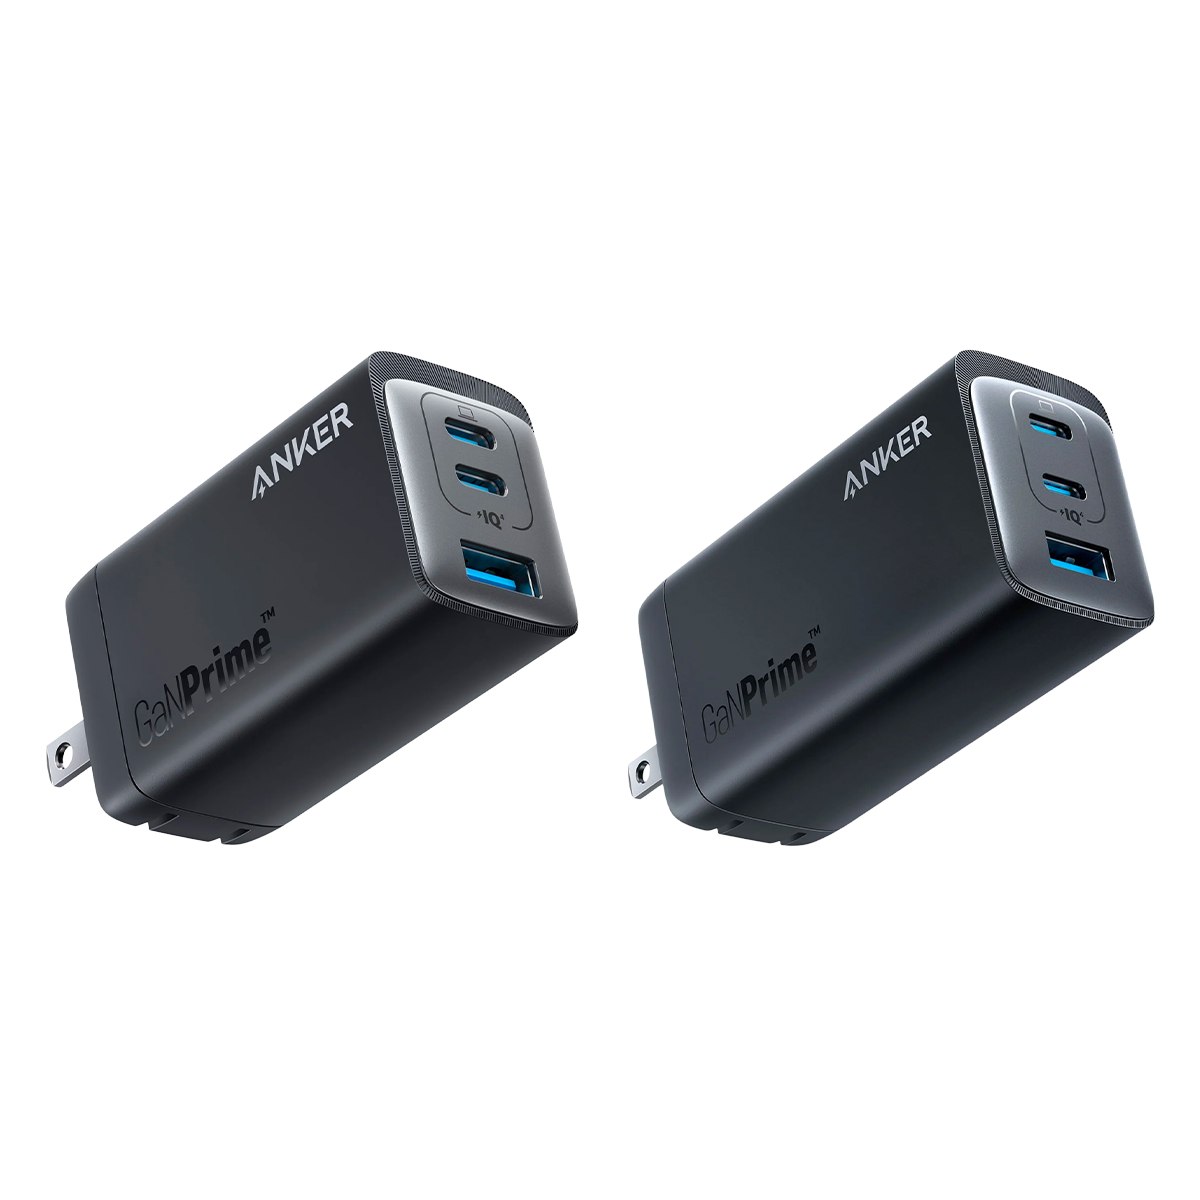 Anker 737 Power Bank (PowerCore 24K) and Anker 735 Charger